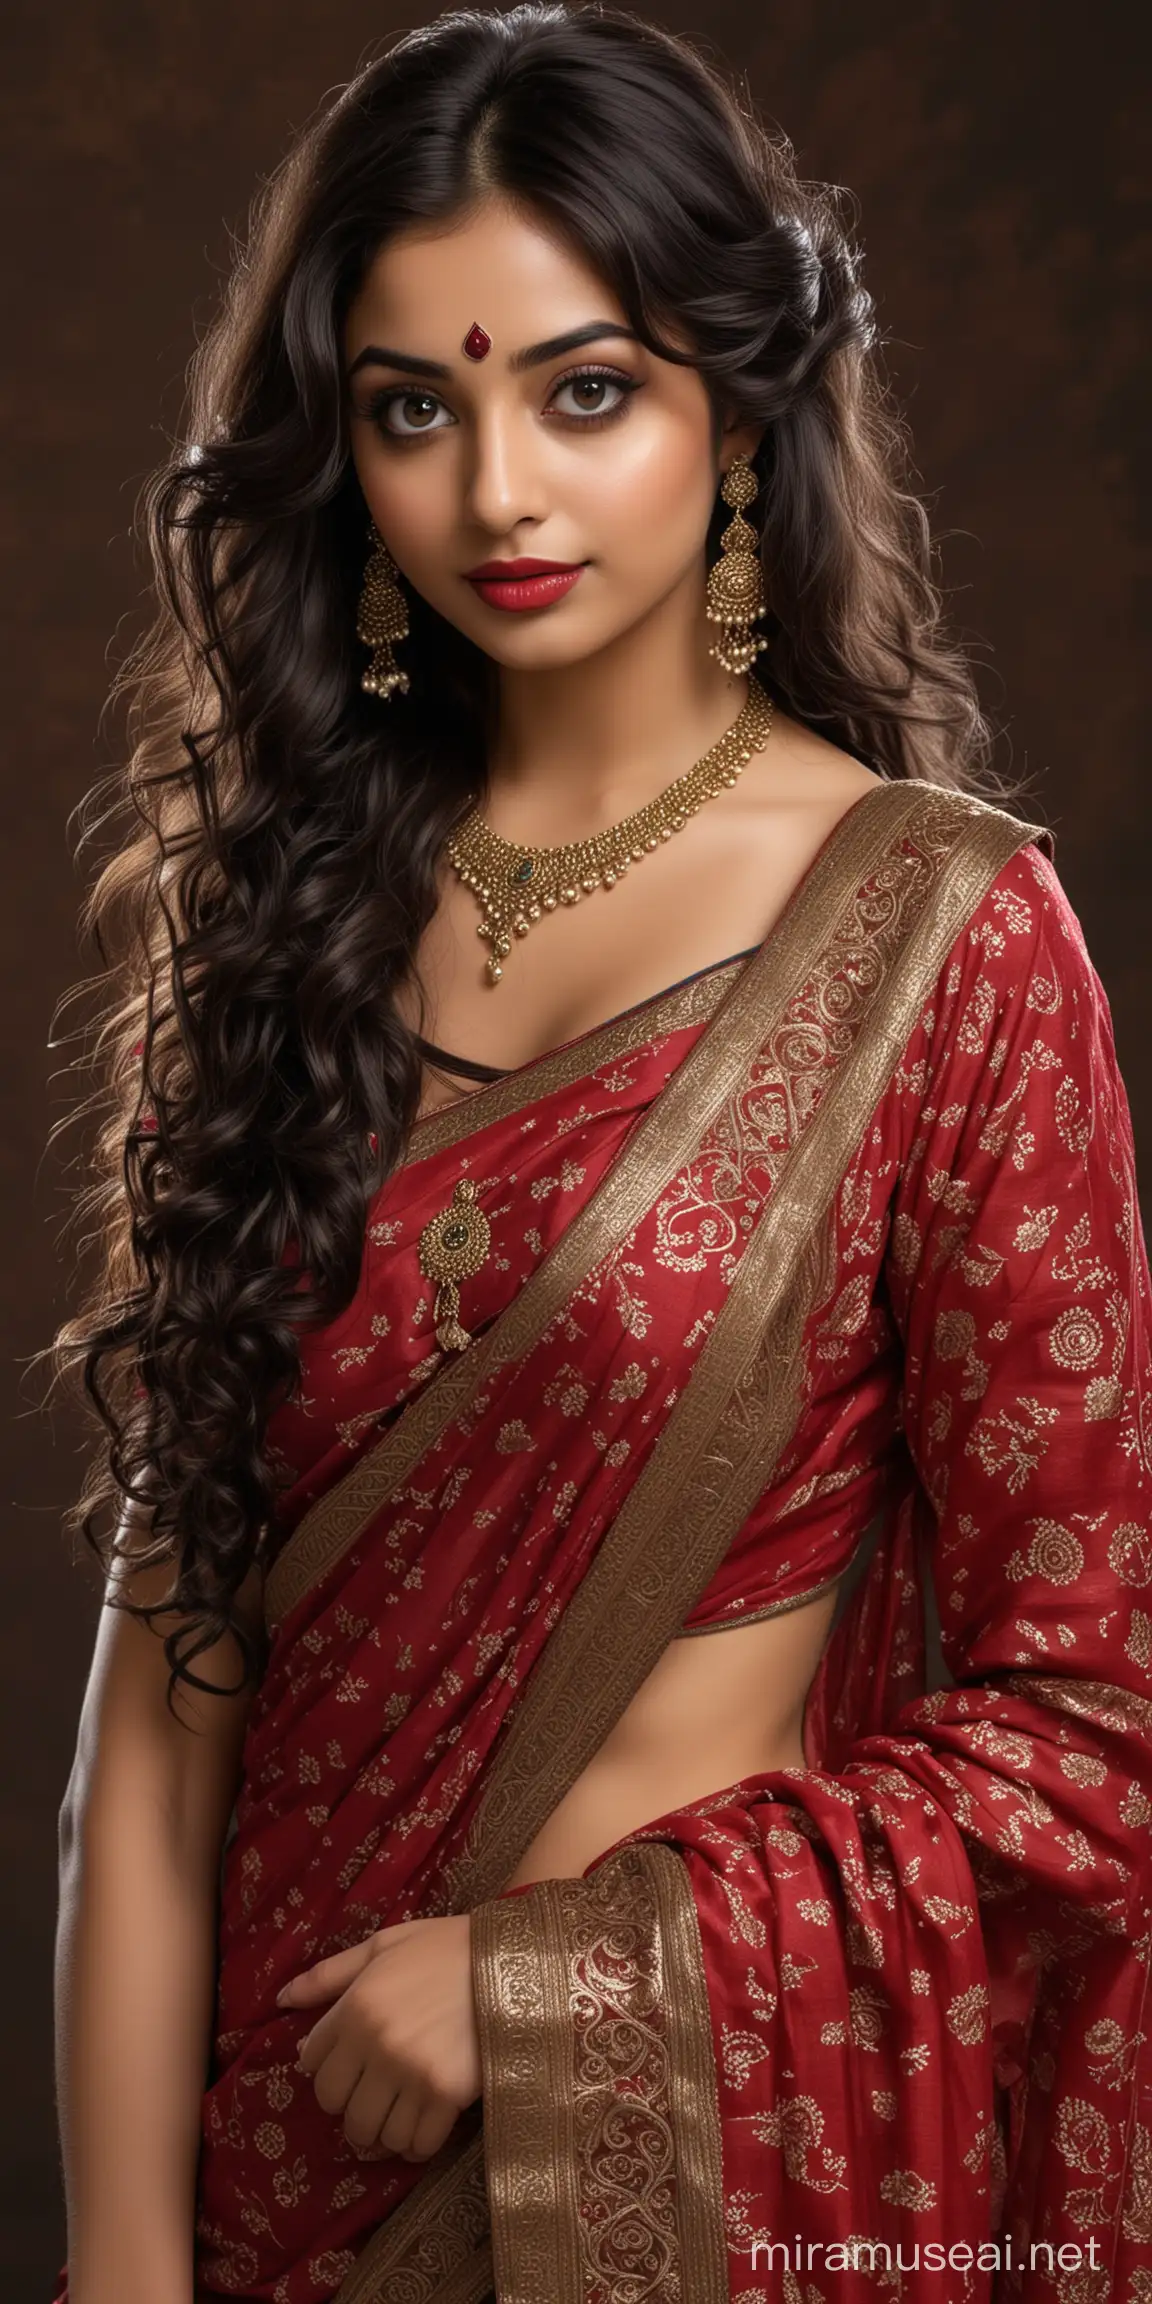 full body photo of most beautiful european girl as beautiful indian girl, standing facing background,  big wide black eyes with eye makeup, thick long curly hair , wide big eyes, brows raised, turned away, looking back over shoulders, perfect symmetric face and eyes, glossy dark red lipsticks, elegant traditional modest saree,  low cut back, intricate details, photo realistic, 4k.